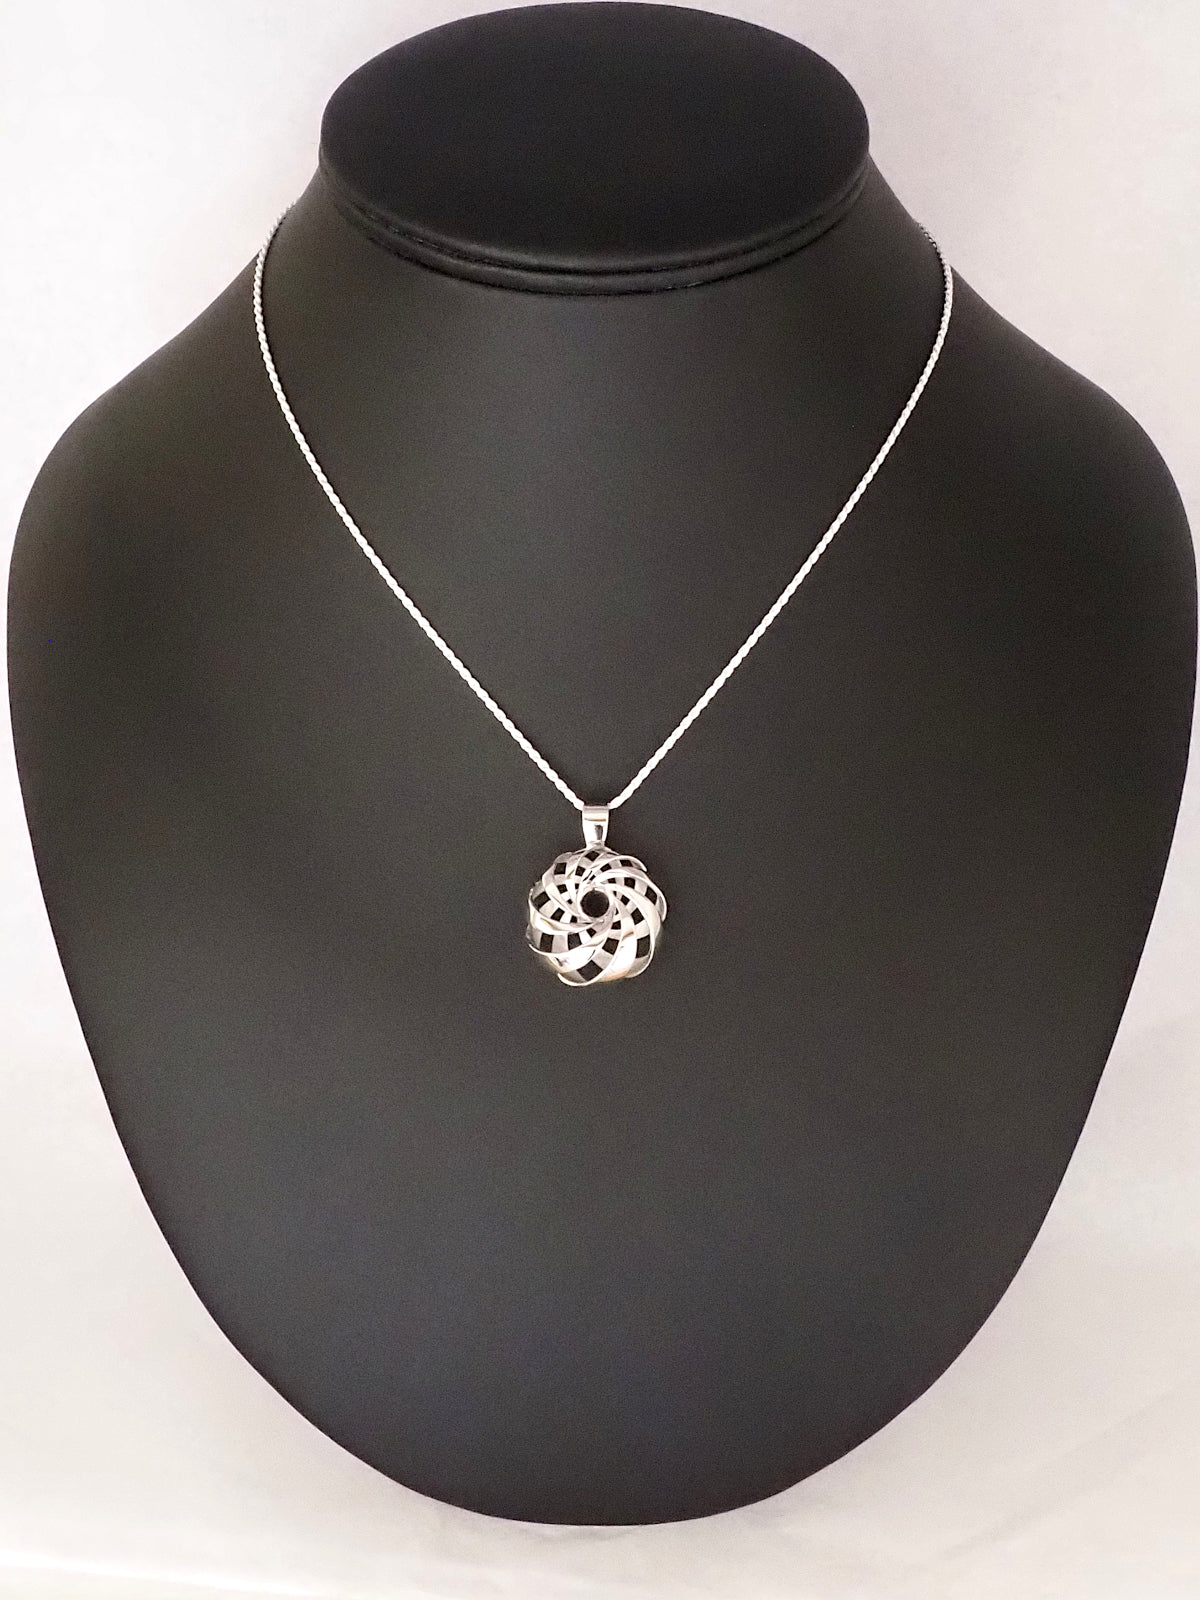 A 25mm rhodium-plated brass cyclide pendant with a silver French rope chain on a necklace display.